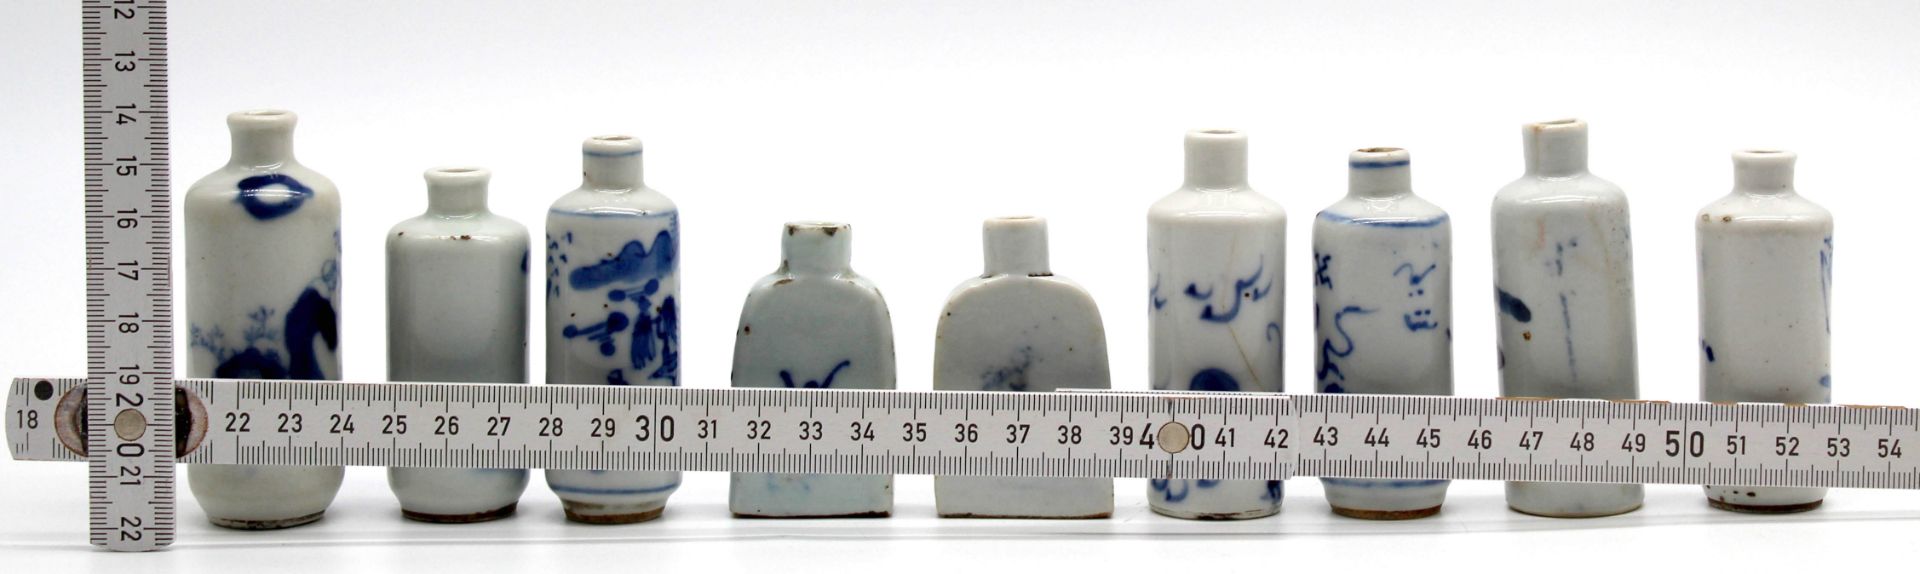 9 porcelain snuff bottles, probably China, old Qing. - Image 14 of 21